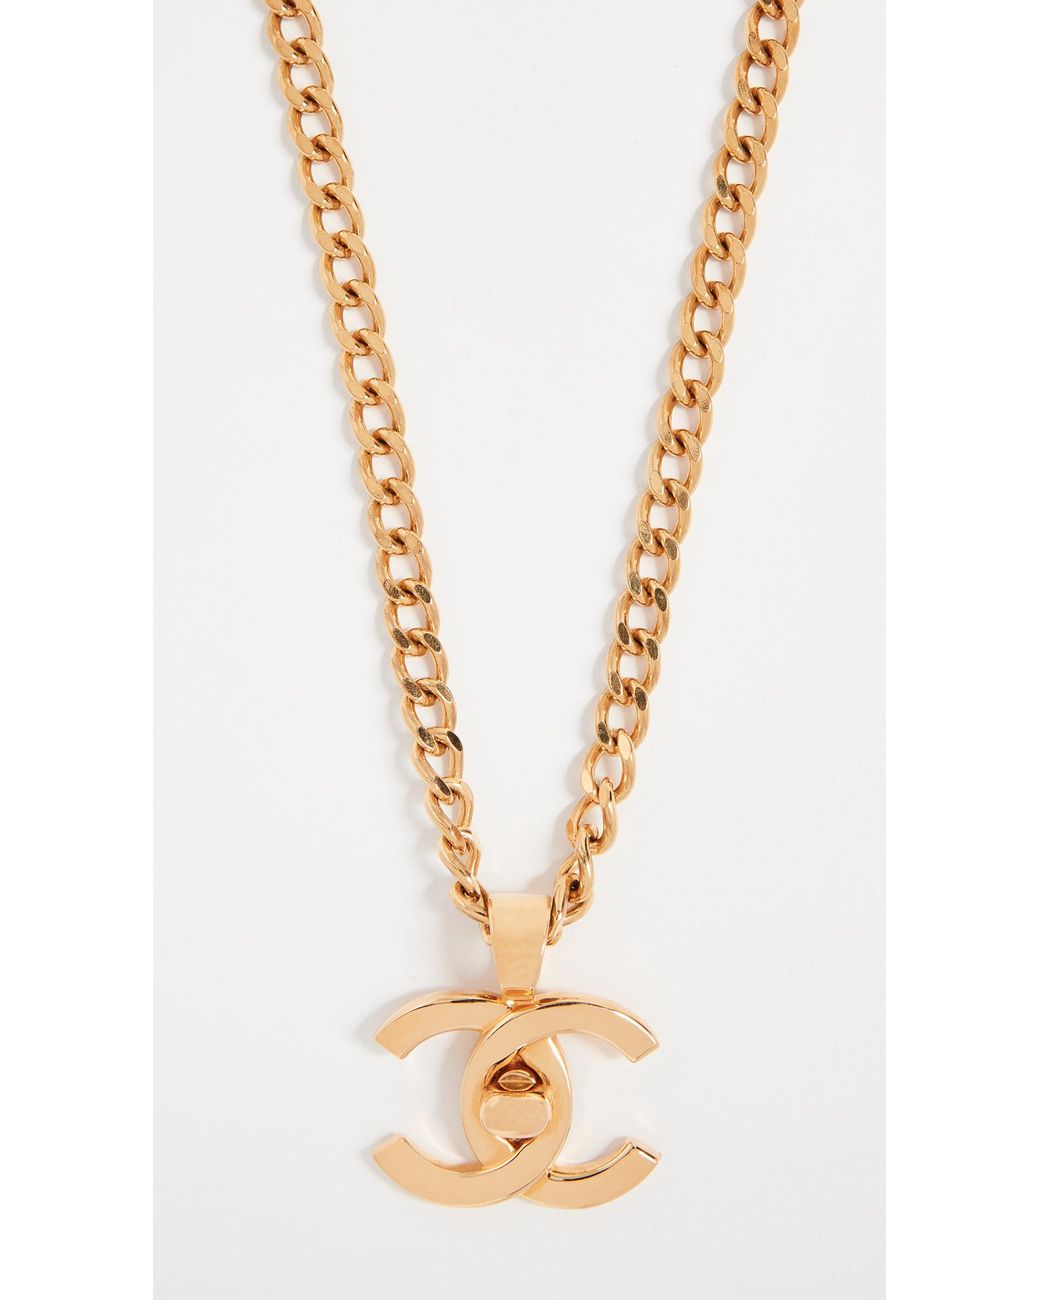 Chanel Turn Lock Necklace - 8 For Sale on 1stDibs | chanel turnlock necklace,  chanel lock necklace, chanel lock pendant